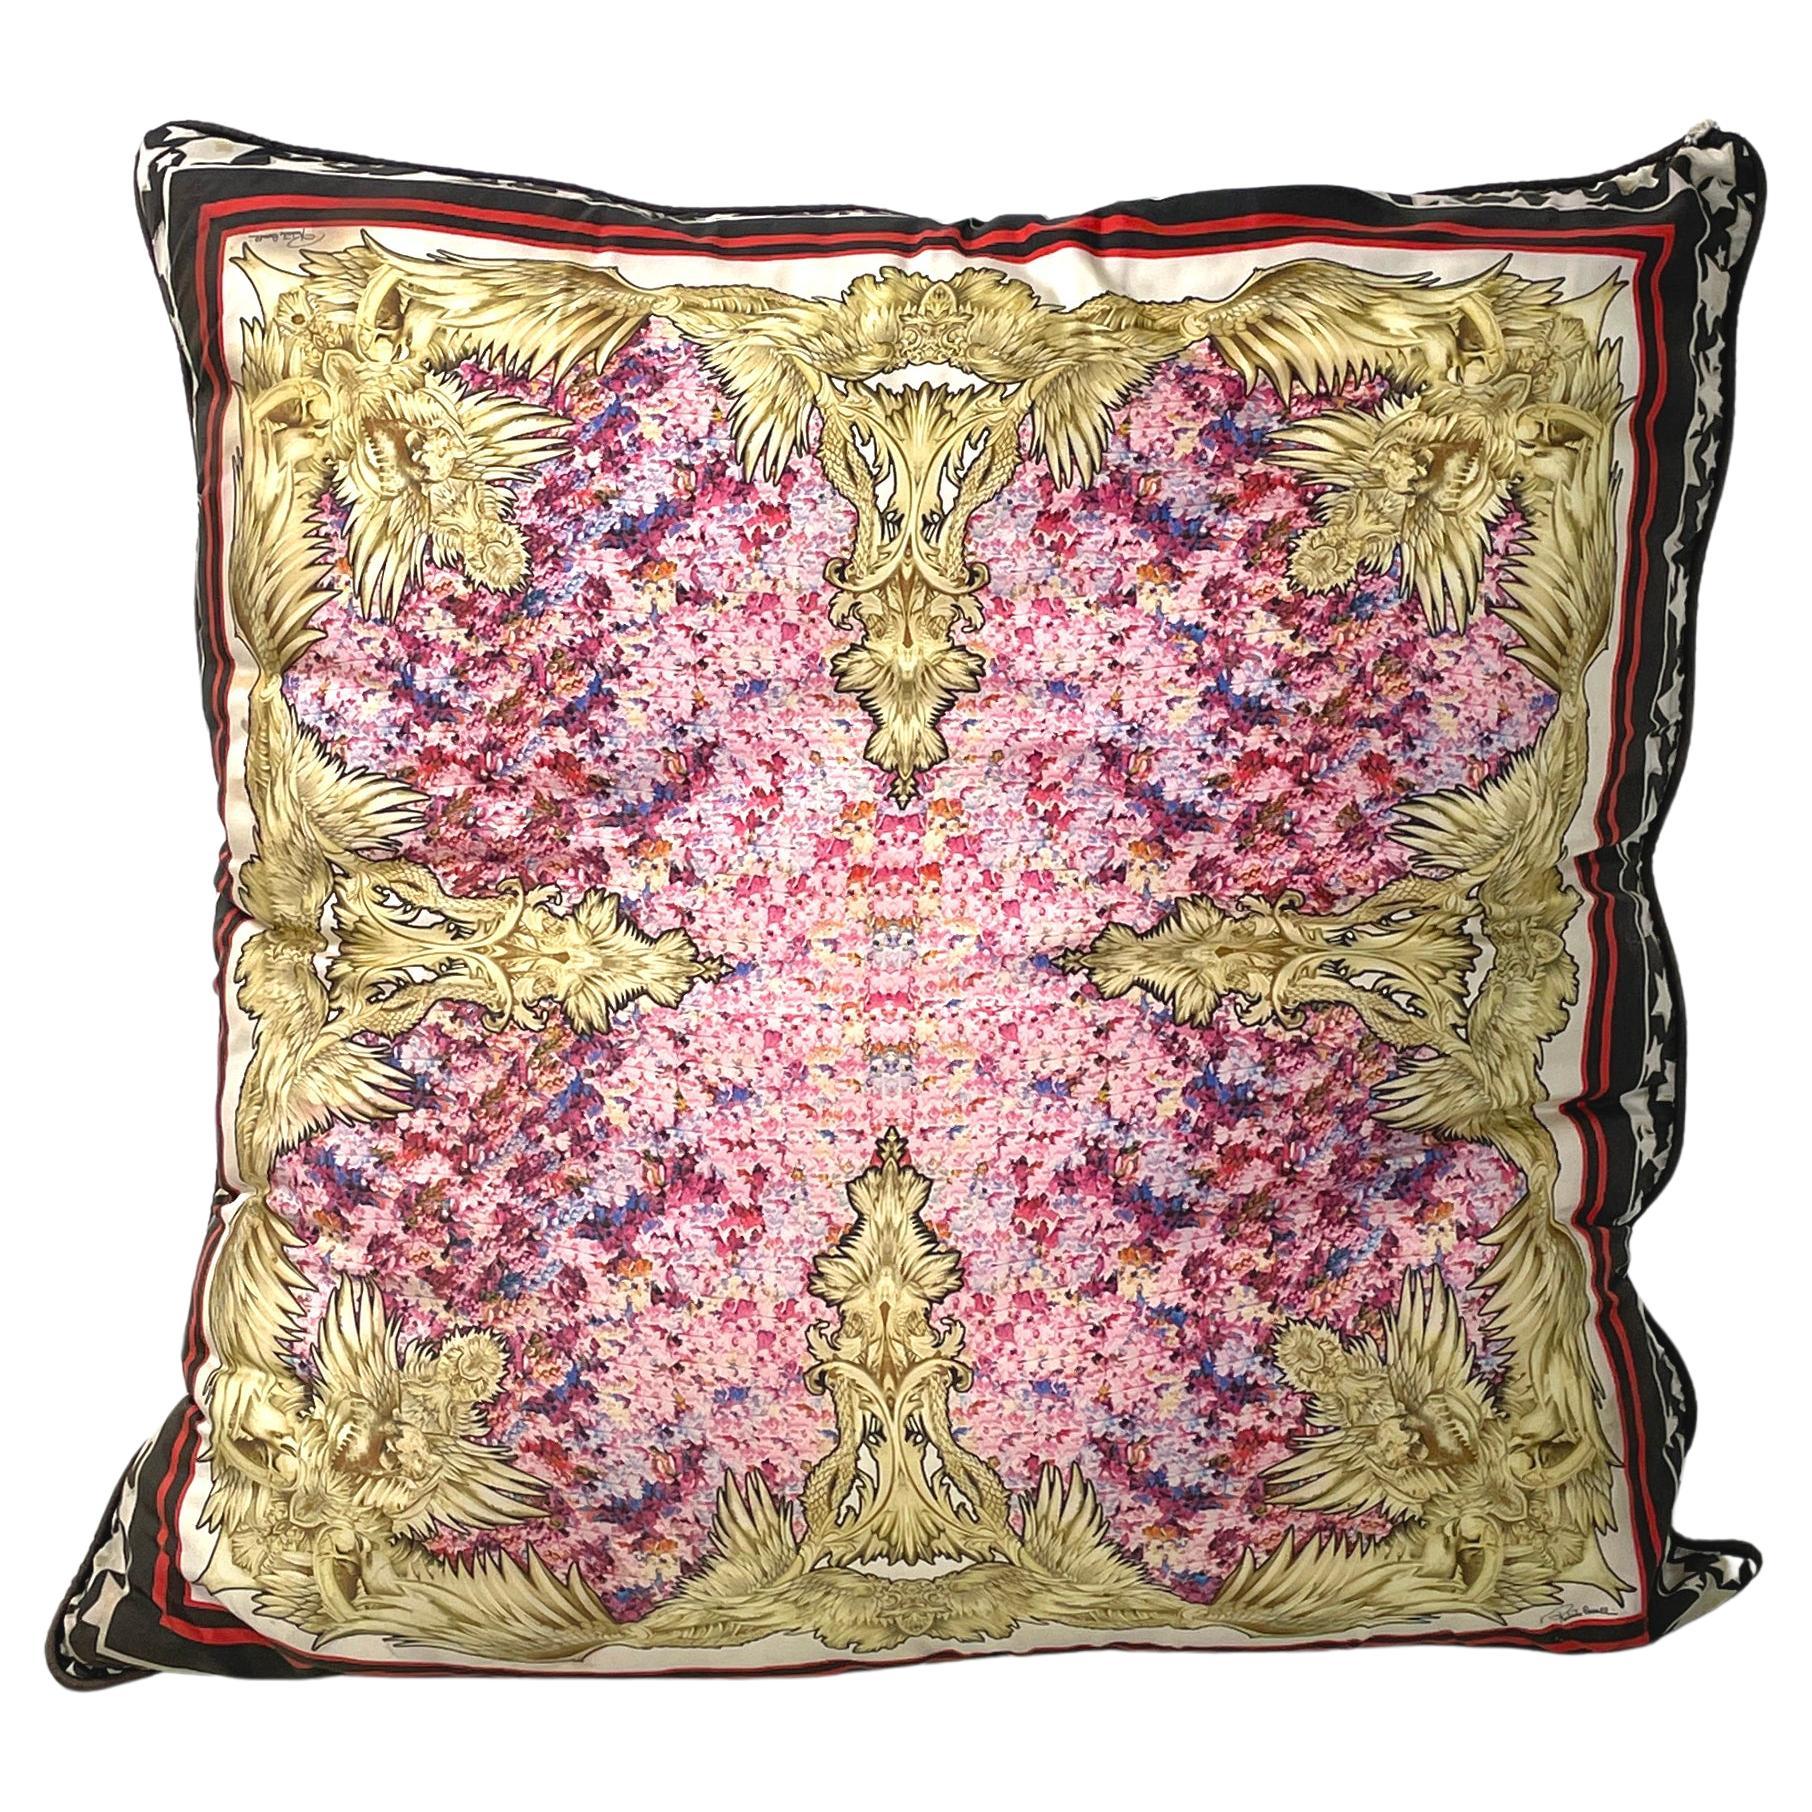 Italian post modern Fabric cushion with colored pattern by Roberto Cavalli 2000s For Sale